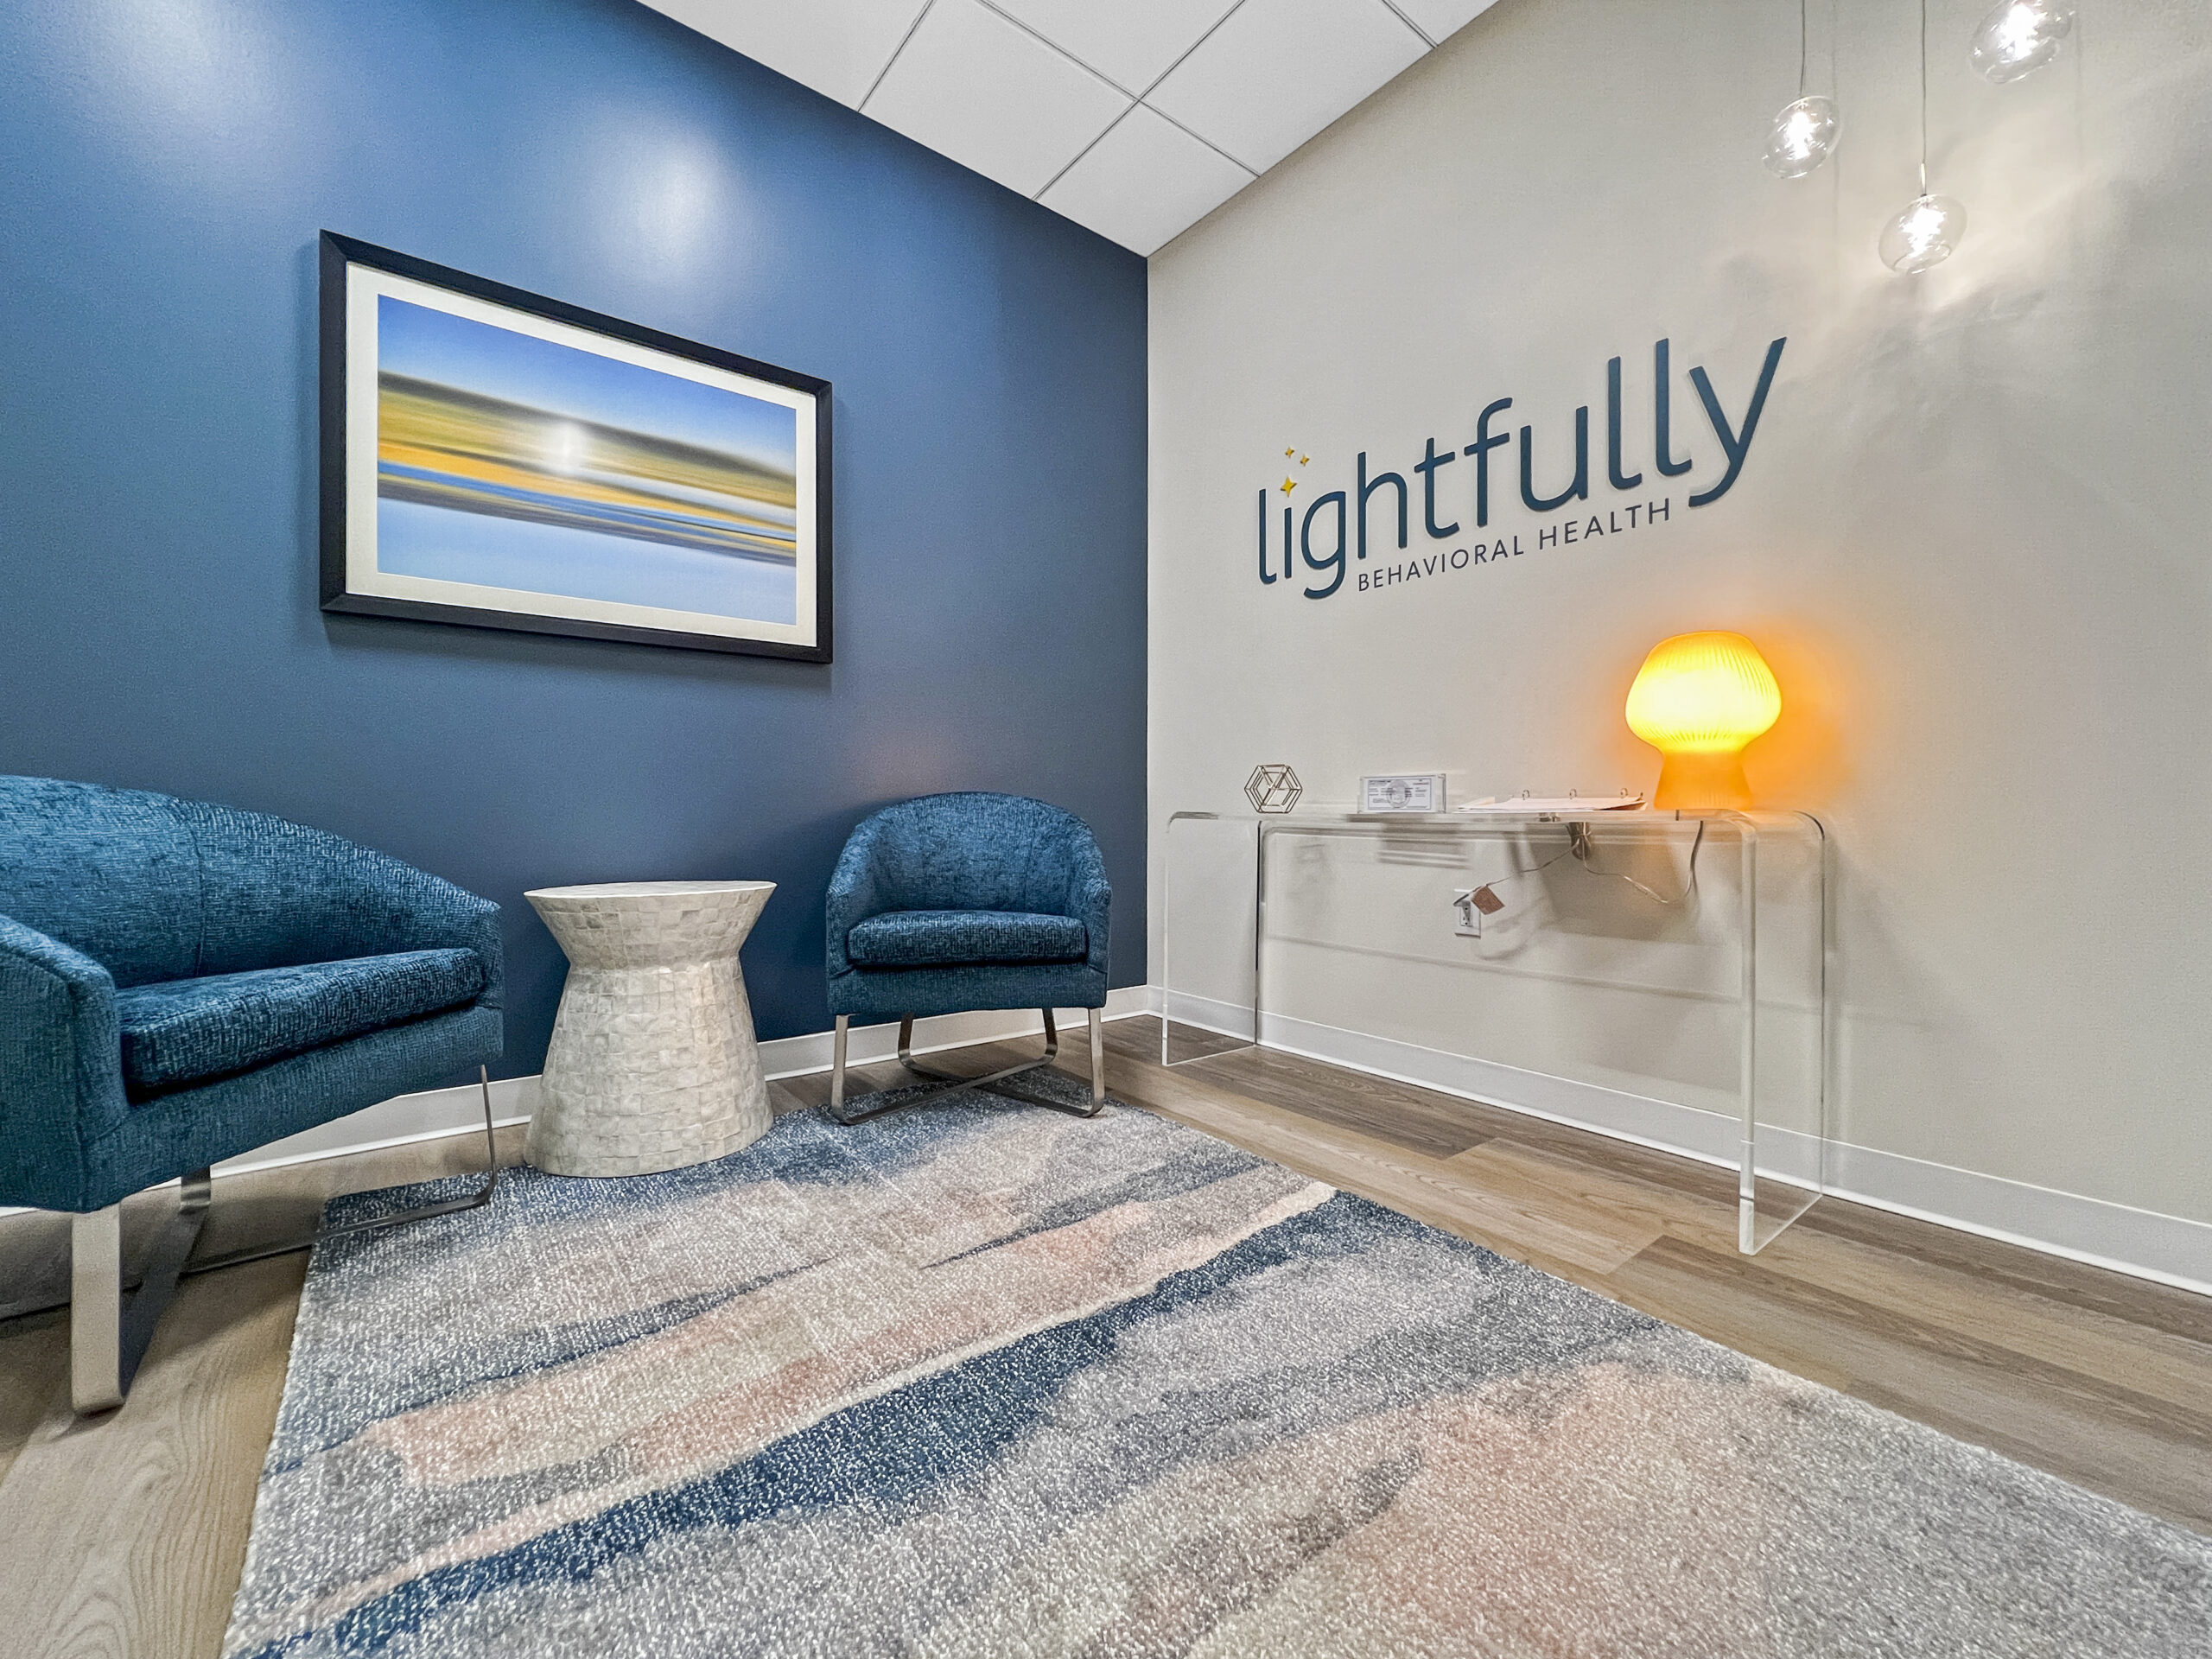 Lightfully Beverly Hills RTC - Lightfully Behavioral Health - Mental Health & Anxiety Disorder Treatment in Los Angeles